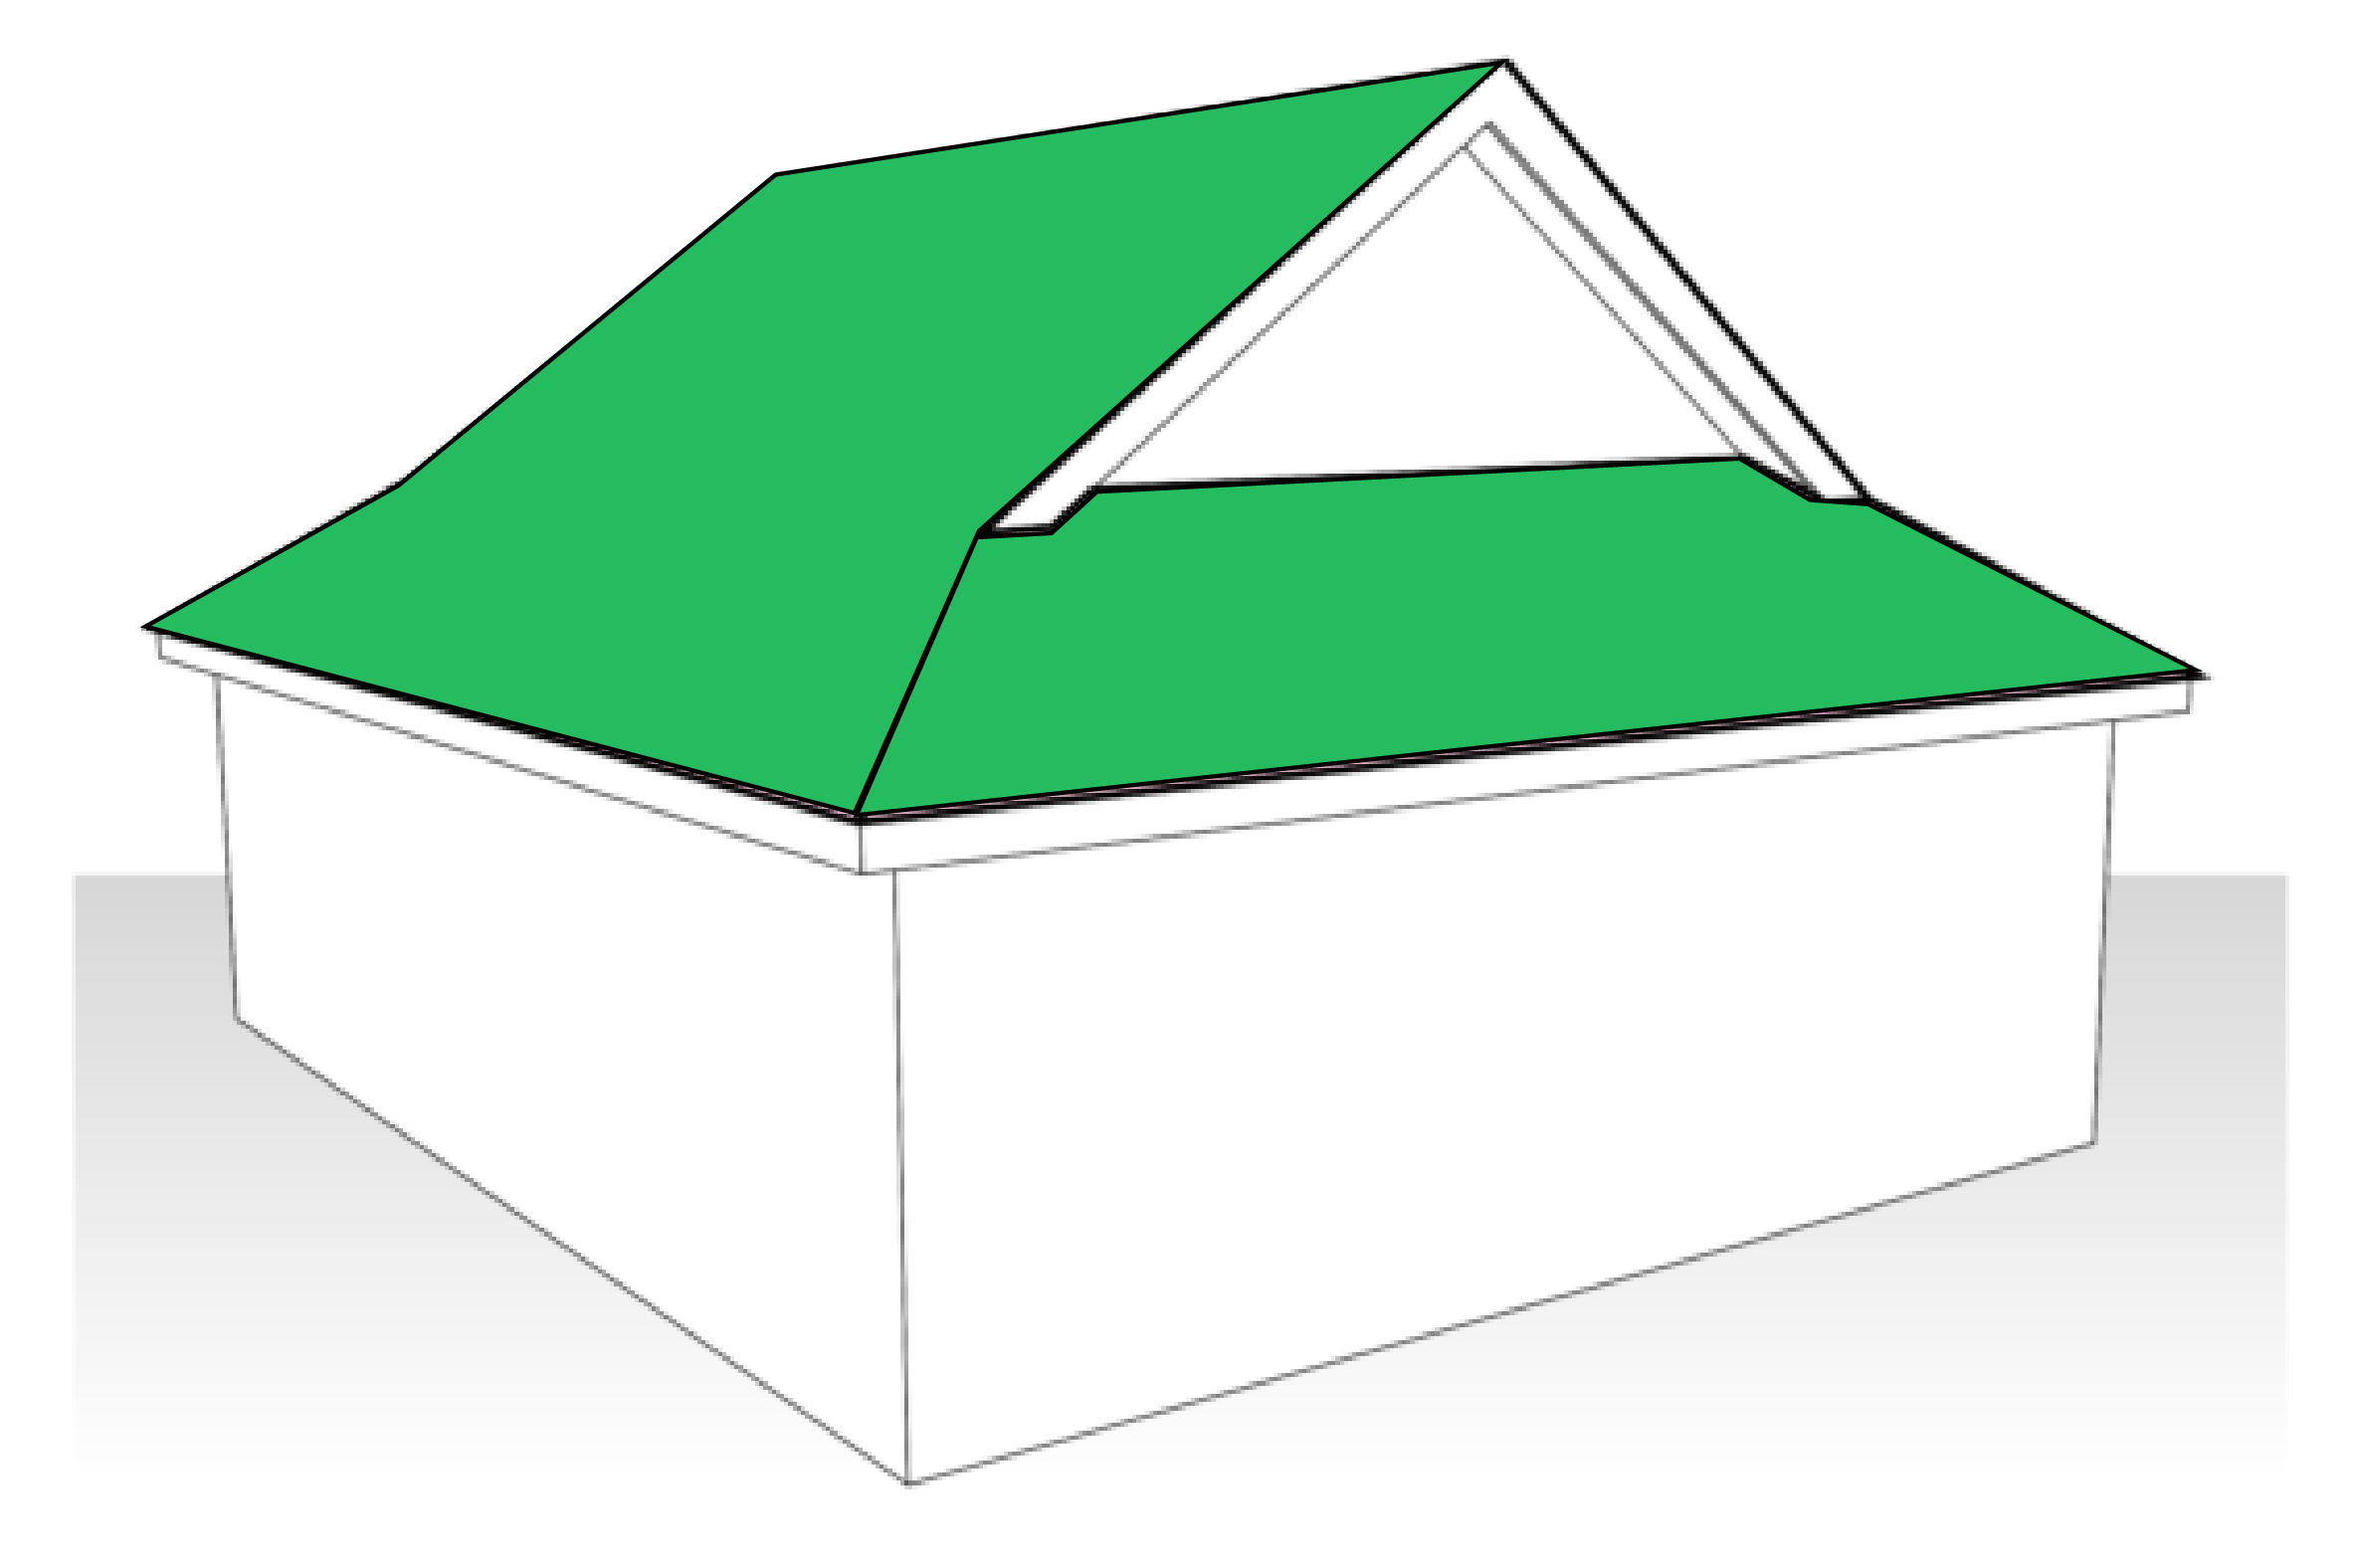 Dutch Gabled Roof Illustration (Eight Most Common Roof Types)